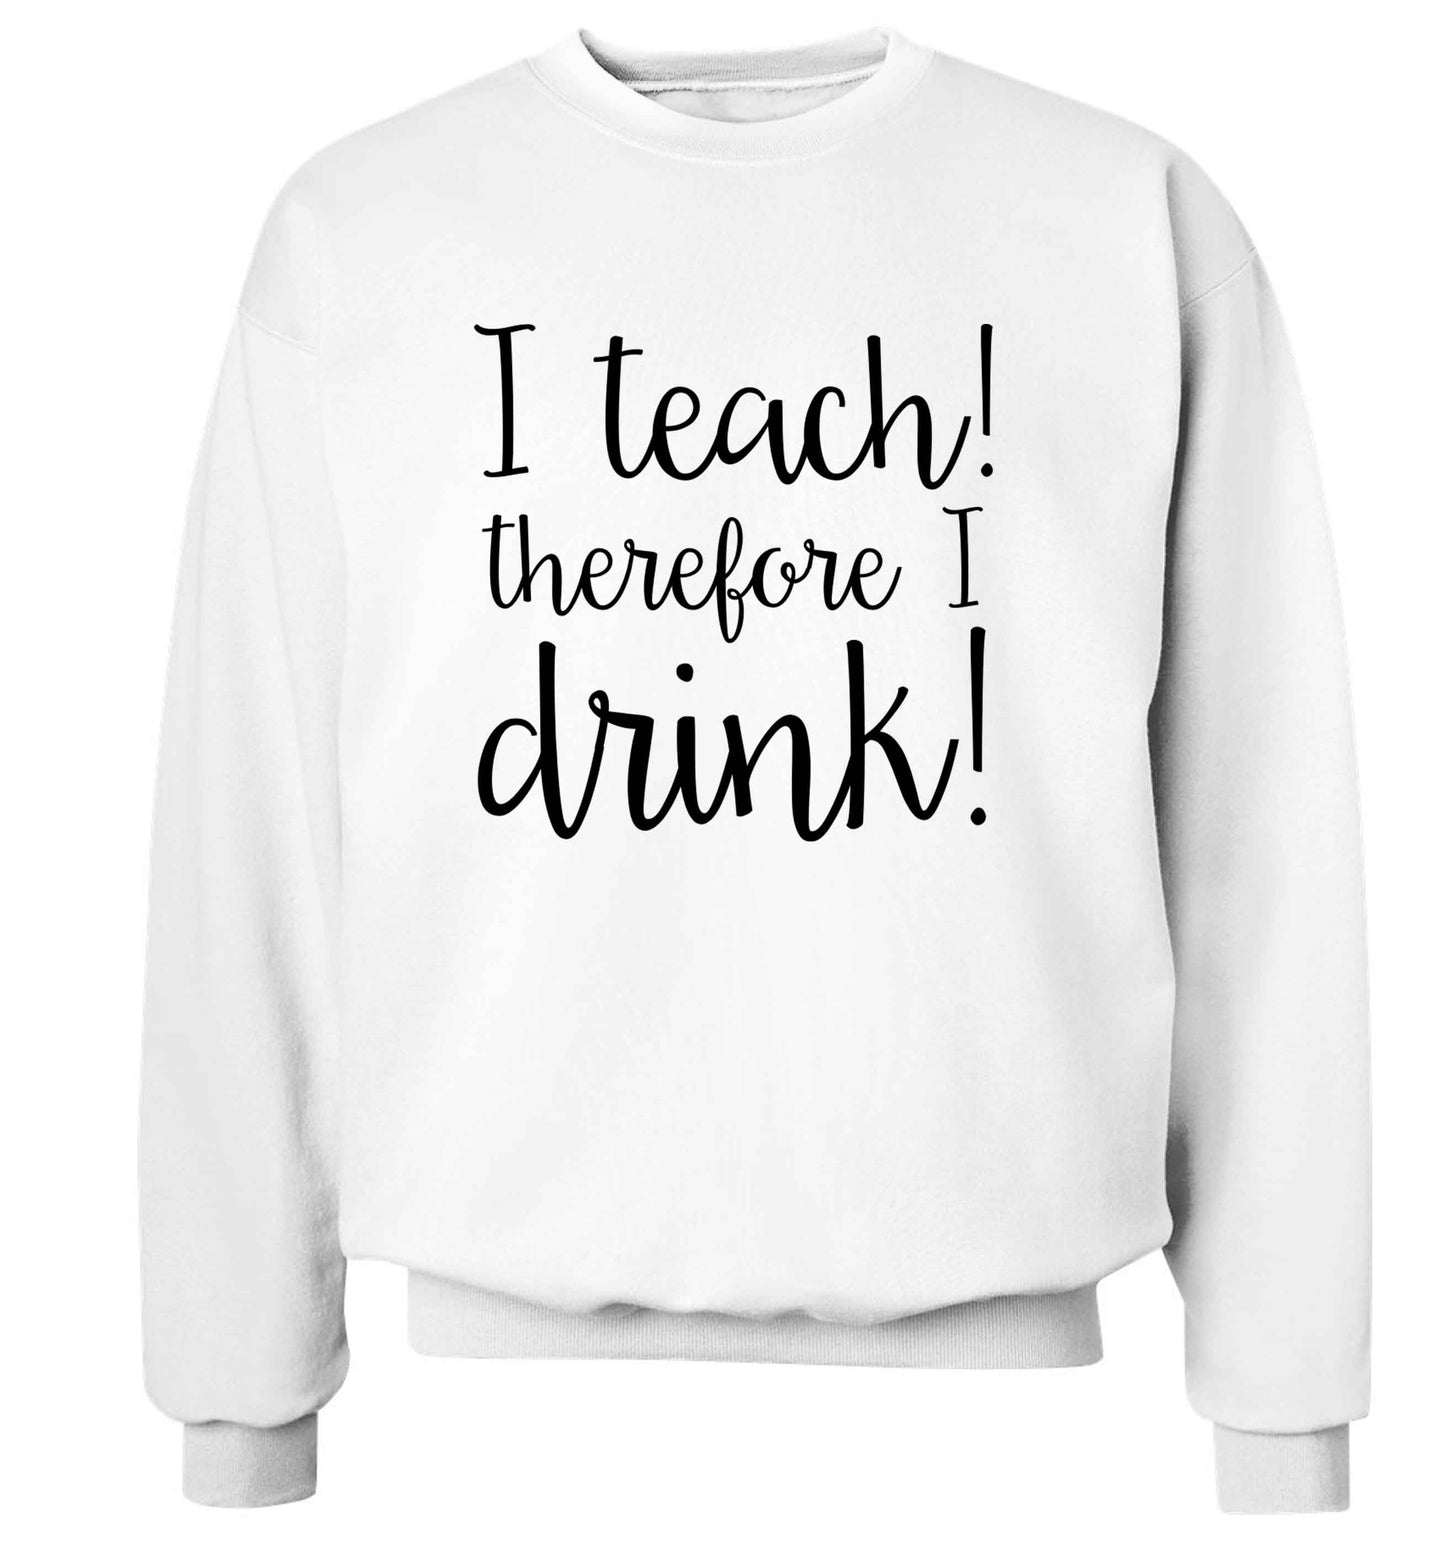 I teach therefore I drink adult's unisex white sweater 2XL